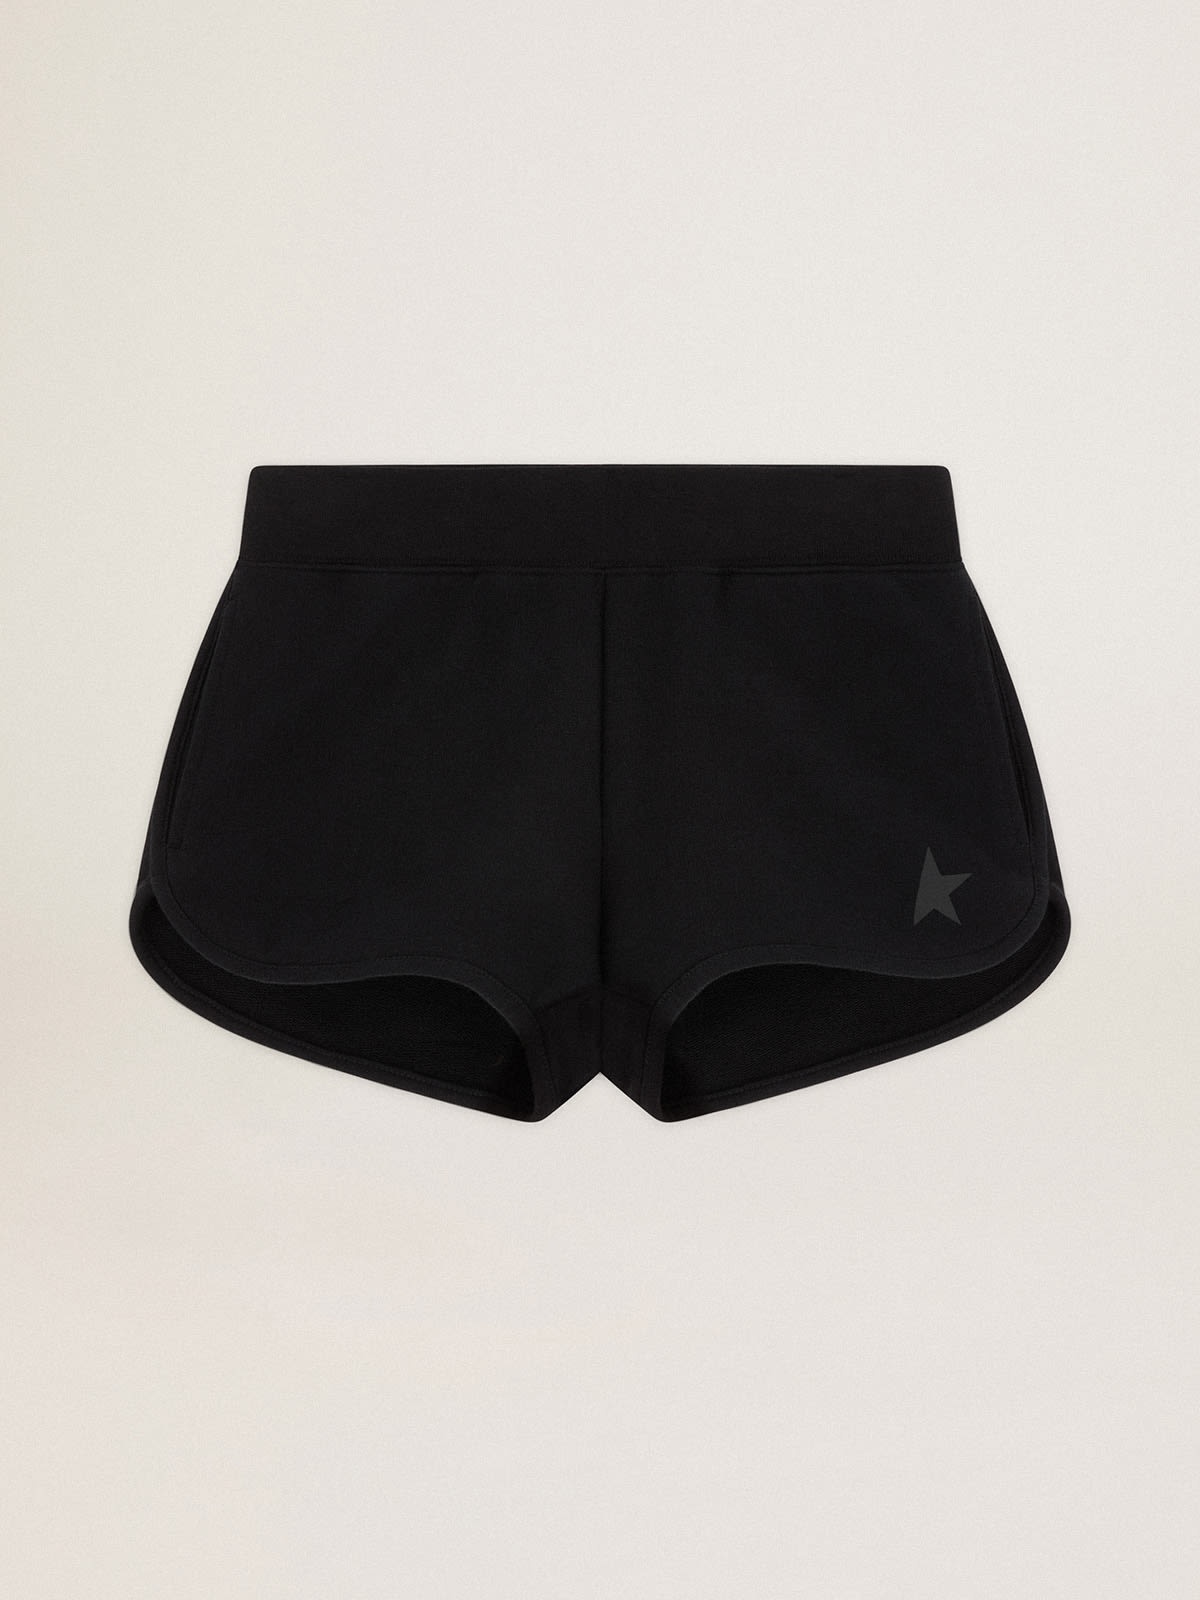 Black shorts with tone-on-tone star on the front - 1